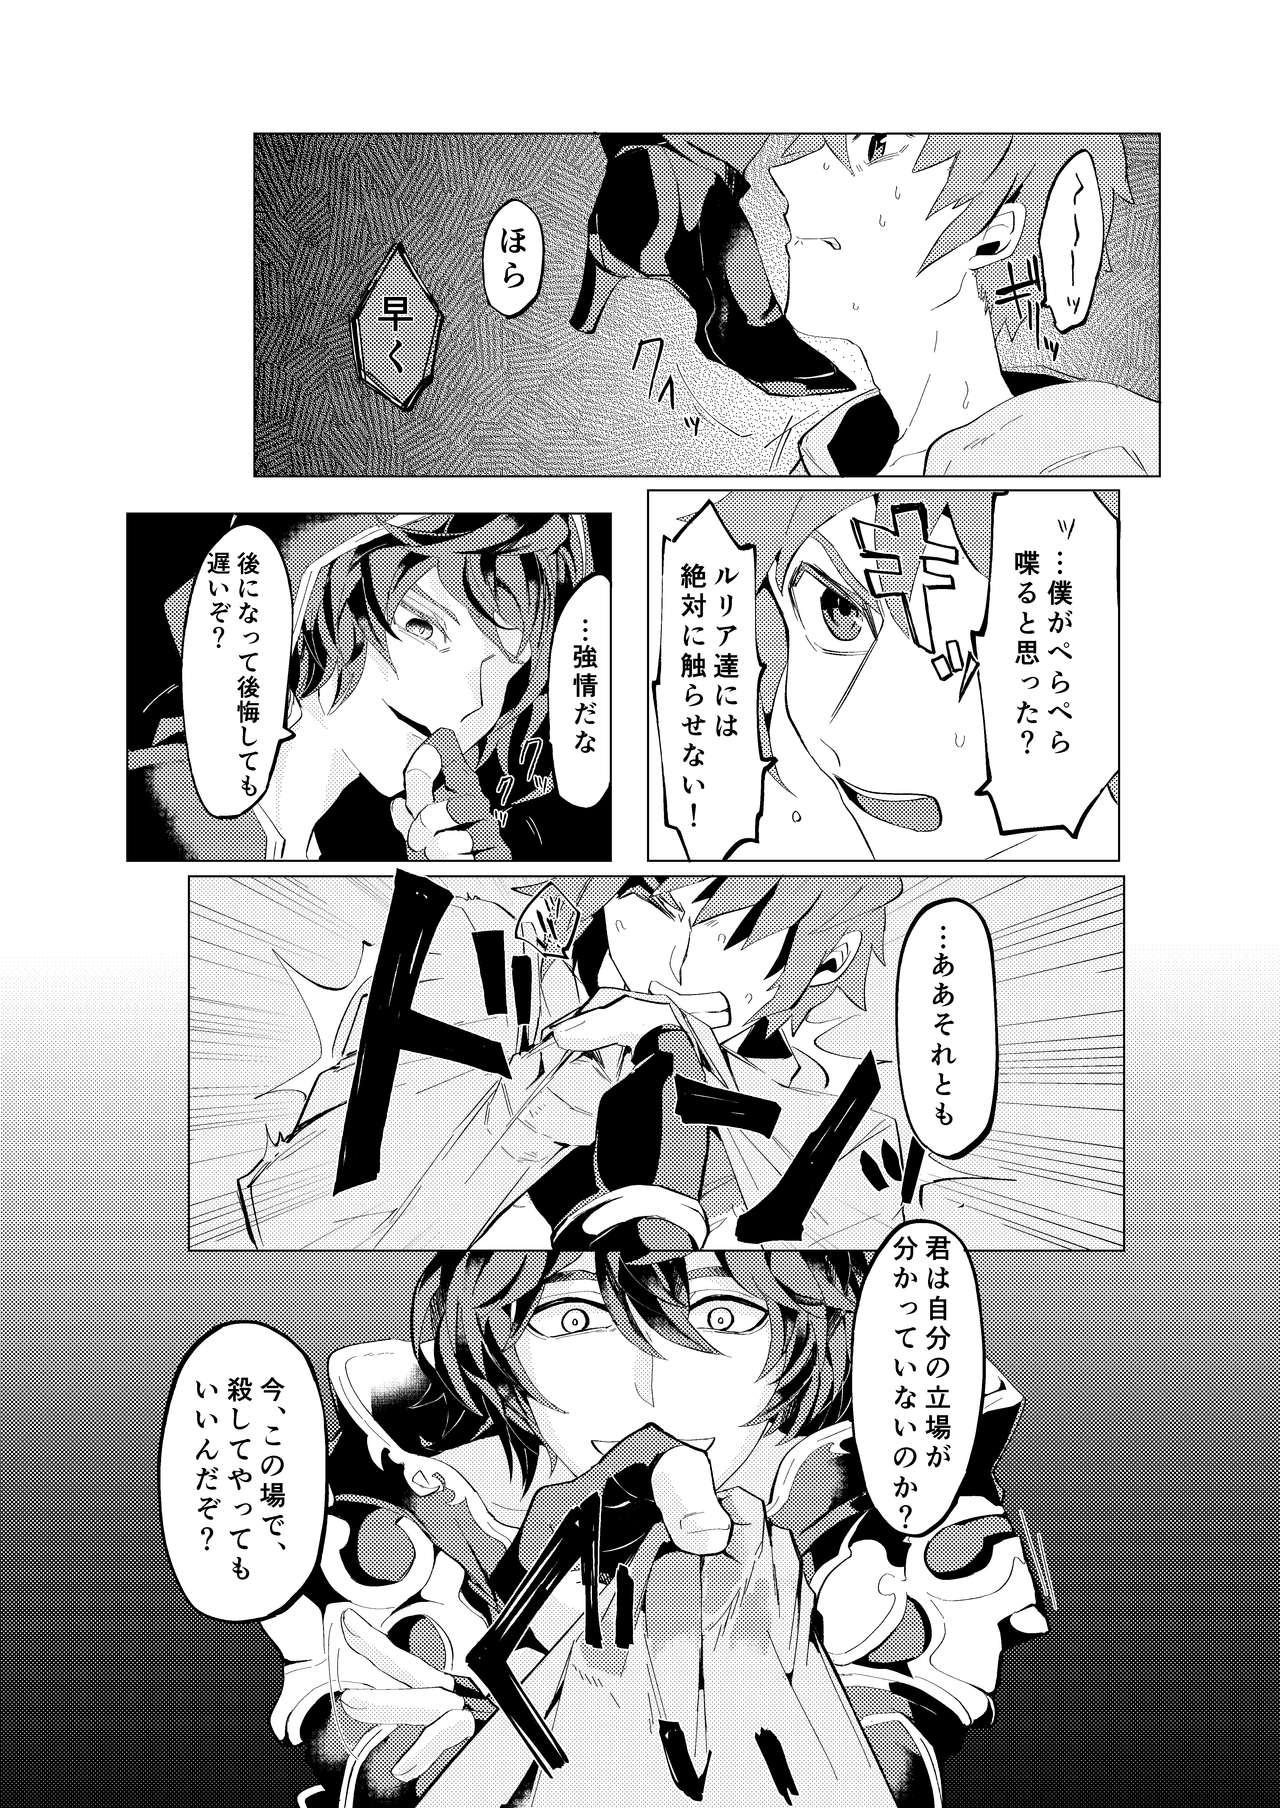 Phat Ass Disaster - Granblue fantasy Livesex - Page 6